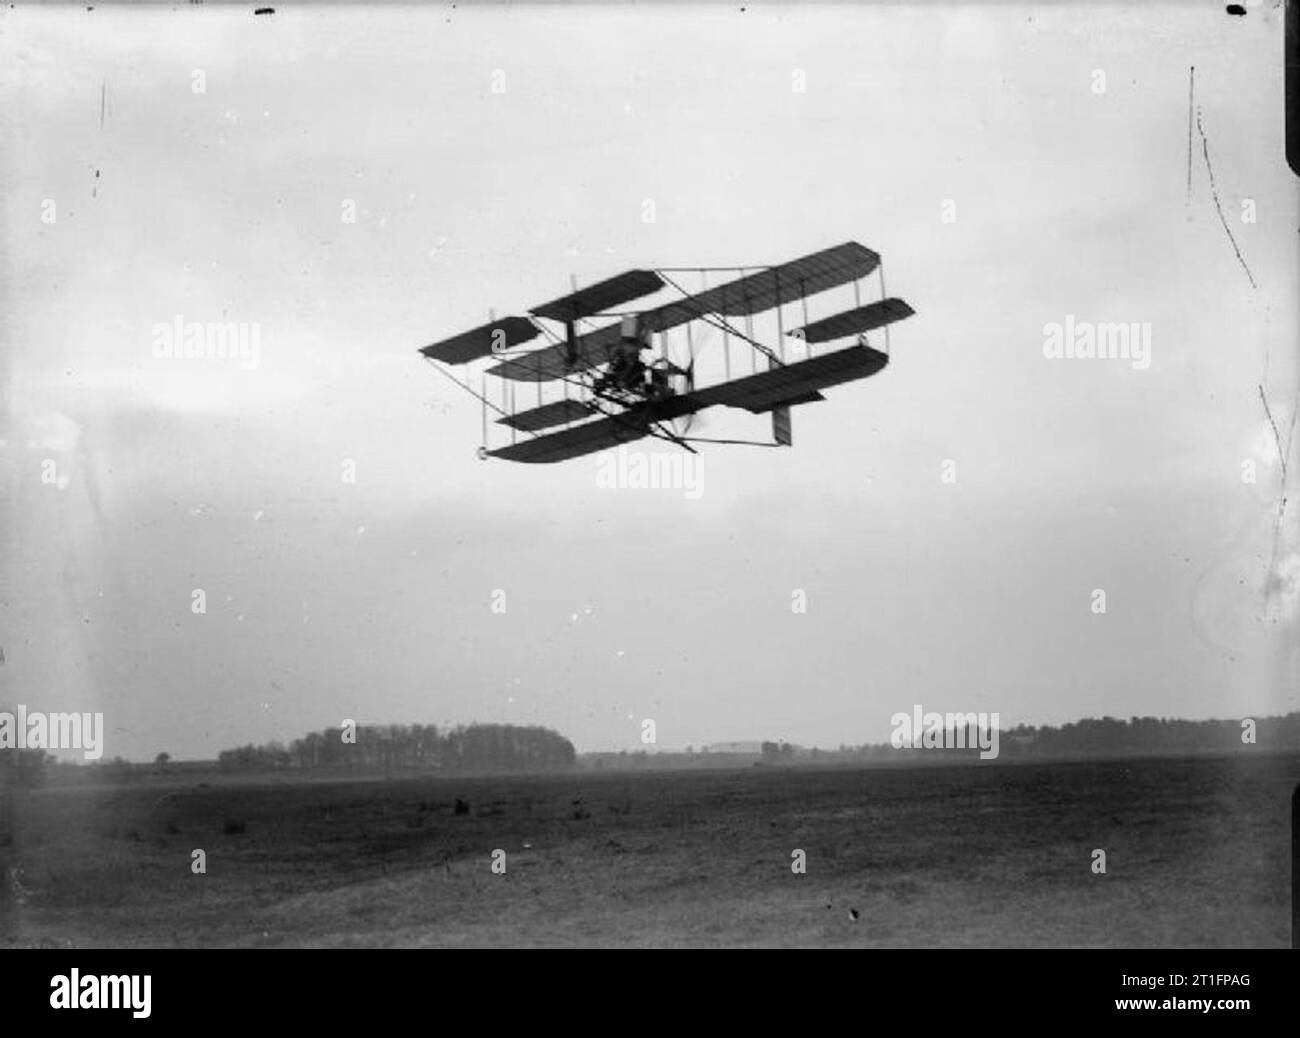 Aviation in Britain Before the First World War Cody aircraft mark II flying over Laffan's Plain. What looks like Cody's workshop can be seen amongst the trees in the background. Cody built this aircraft in 1910; the previous aircraft had been in several crashes and was suffering generally from constant usage. The design of this aircraft followed similar lines to the previous one though the wingspan was shorter by around six feet and the wing area around a third smaller. The single propeller was originally intended to be powered by two 60 hp Green engines (mark IIA) though problems with synchro Stock Photo